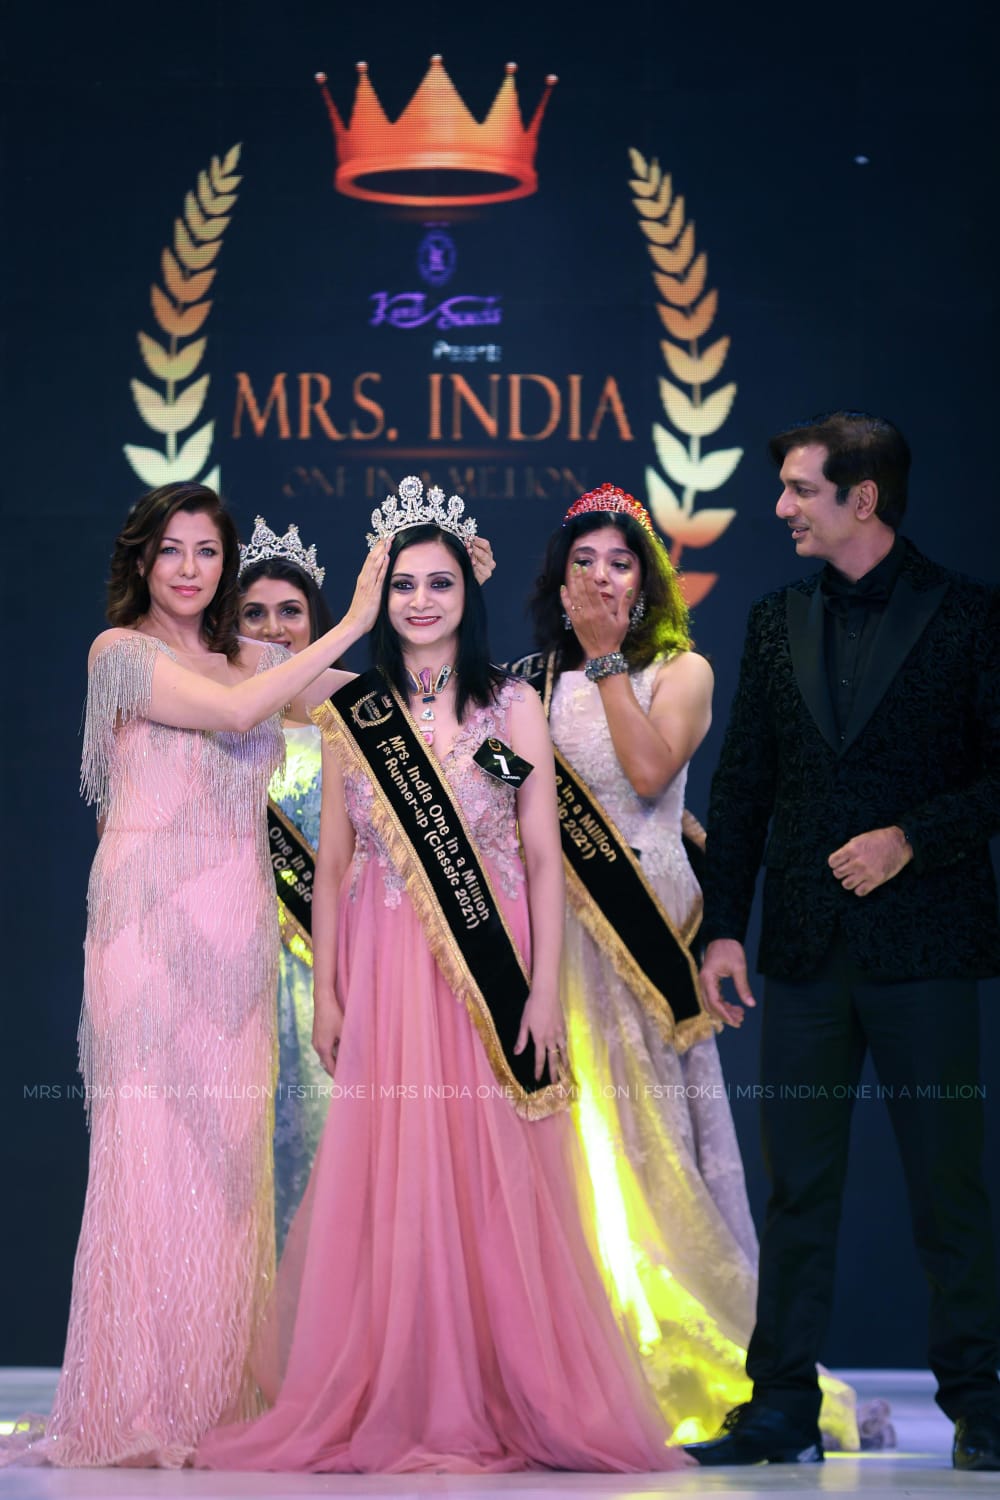 MRS. INDIA-ONE IN A MILLION’21 WINNER- SHAILY KADYAN bags three big titles in the beauty pageant.